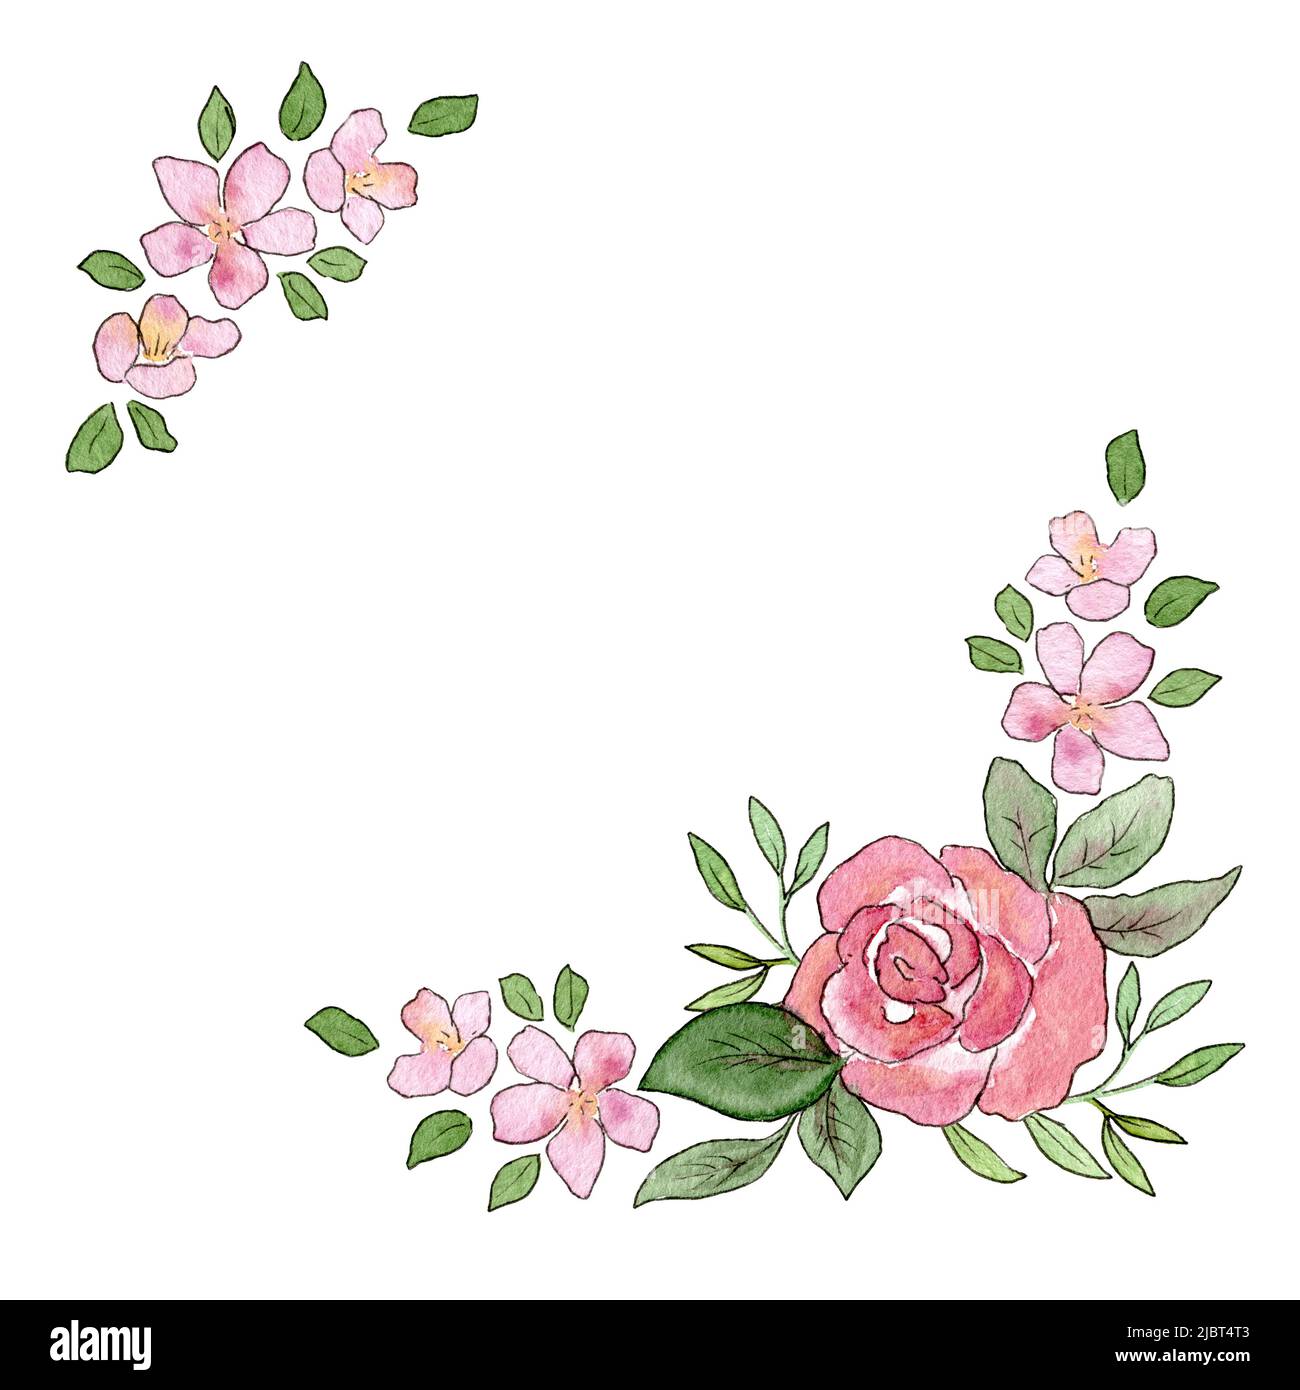 Border roses Cut Out Stock Images & Pictures - Page 2 - Alamy